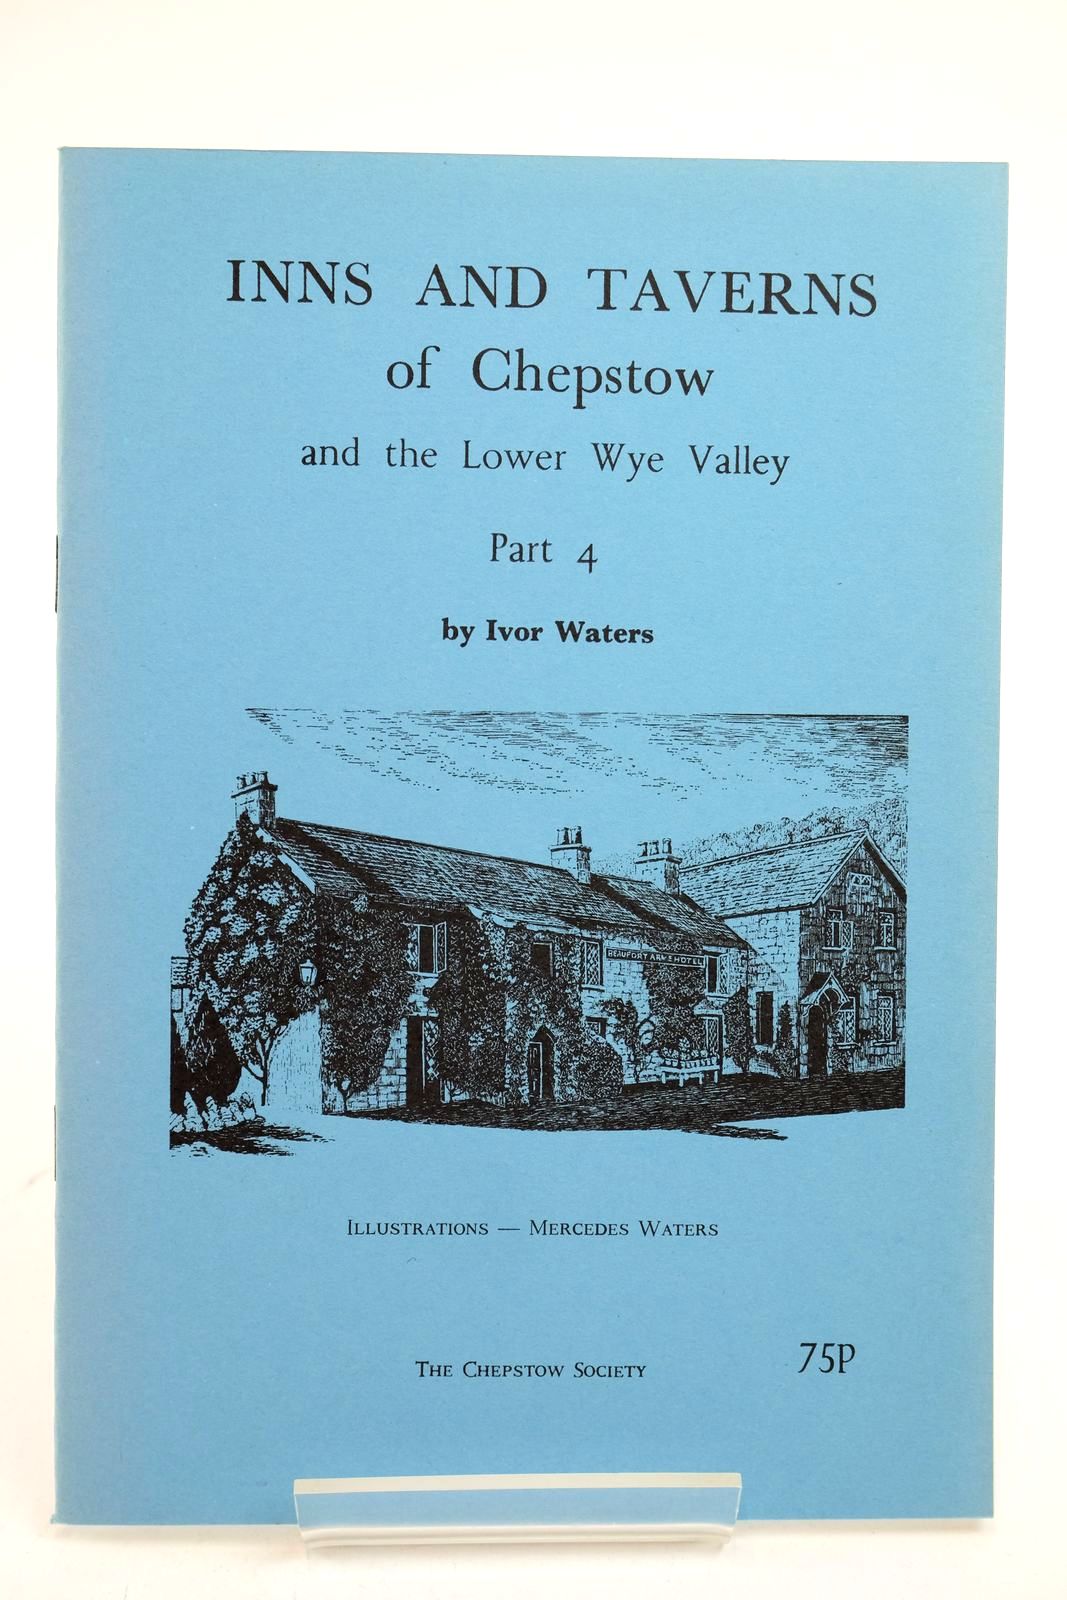 Photo of INNS AND TAVERNS OF CHEPSTOW AND THE LOWER WYE VALLEY PART 4 written by Waters, Ivor illustrated by Waters, Mercedes published by The Chepstow Society (STOCK CODE: 2139426)  for sale by Stella & Rose's Books